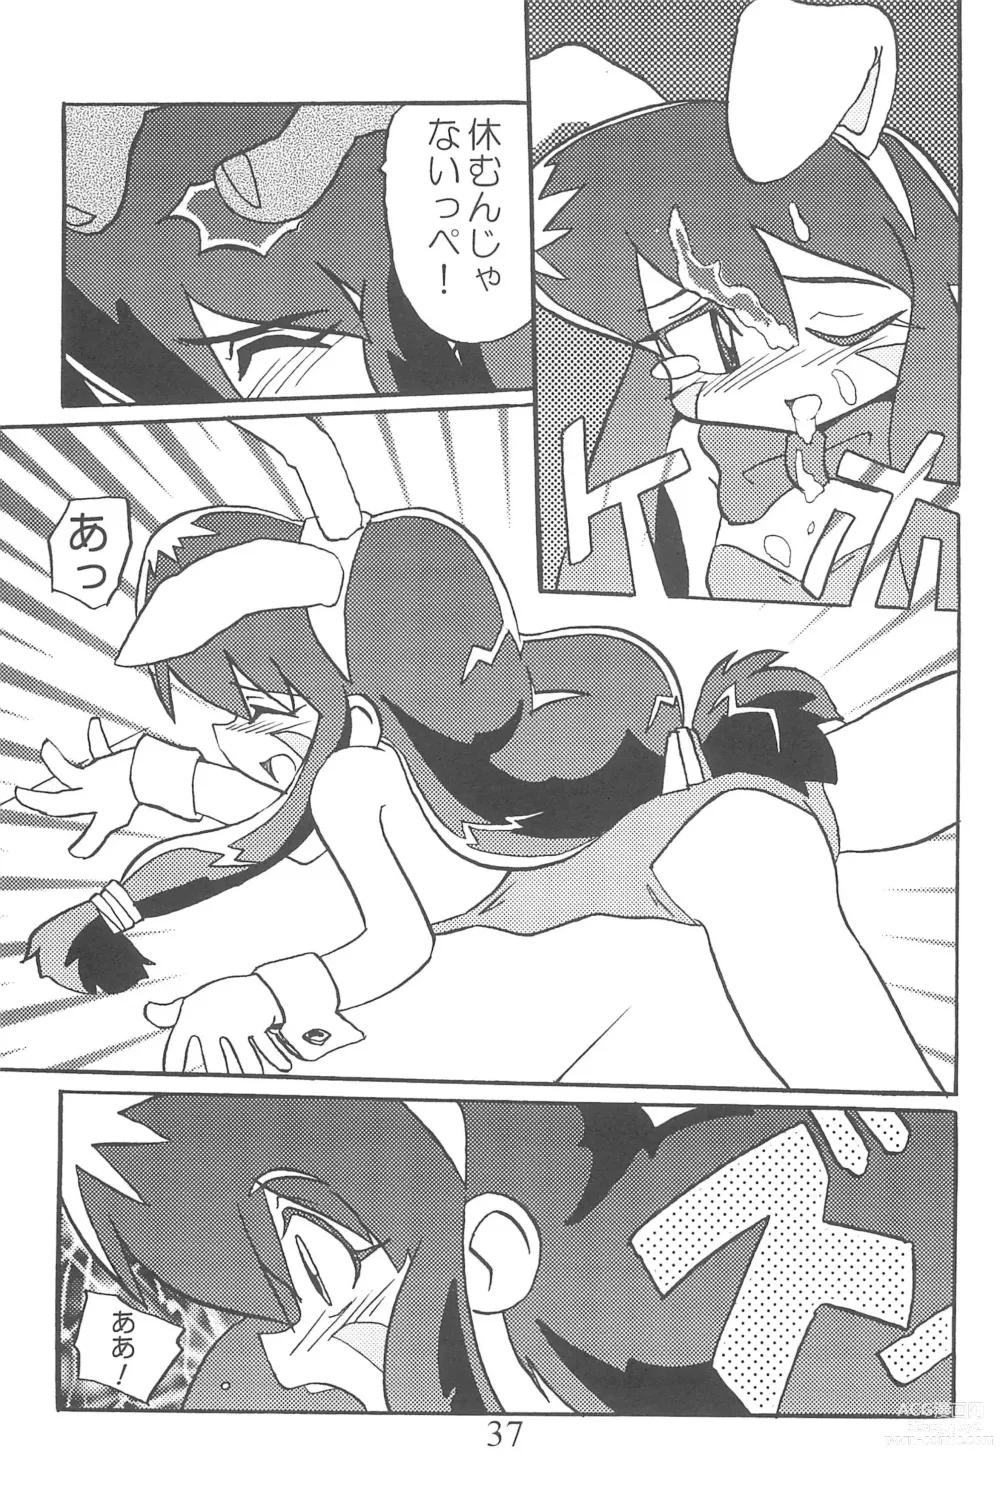 Page 37 of doujinshi Amuse-gueule